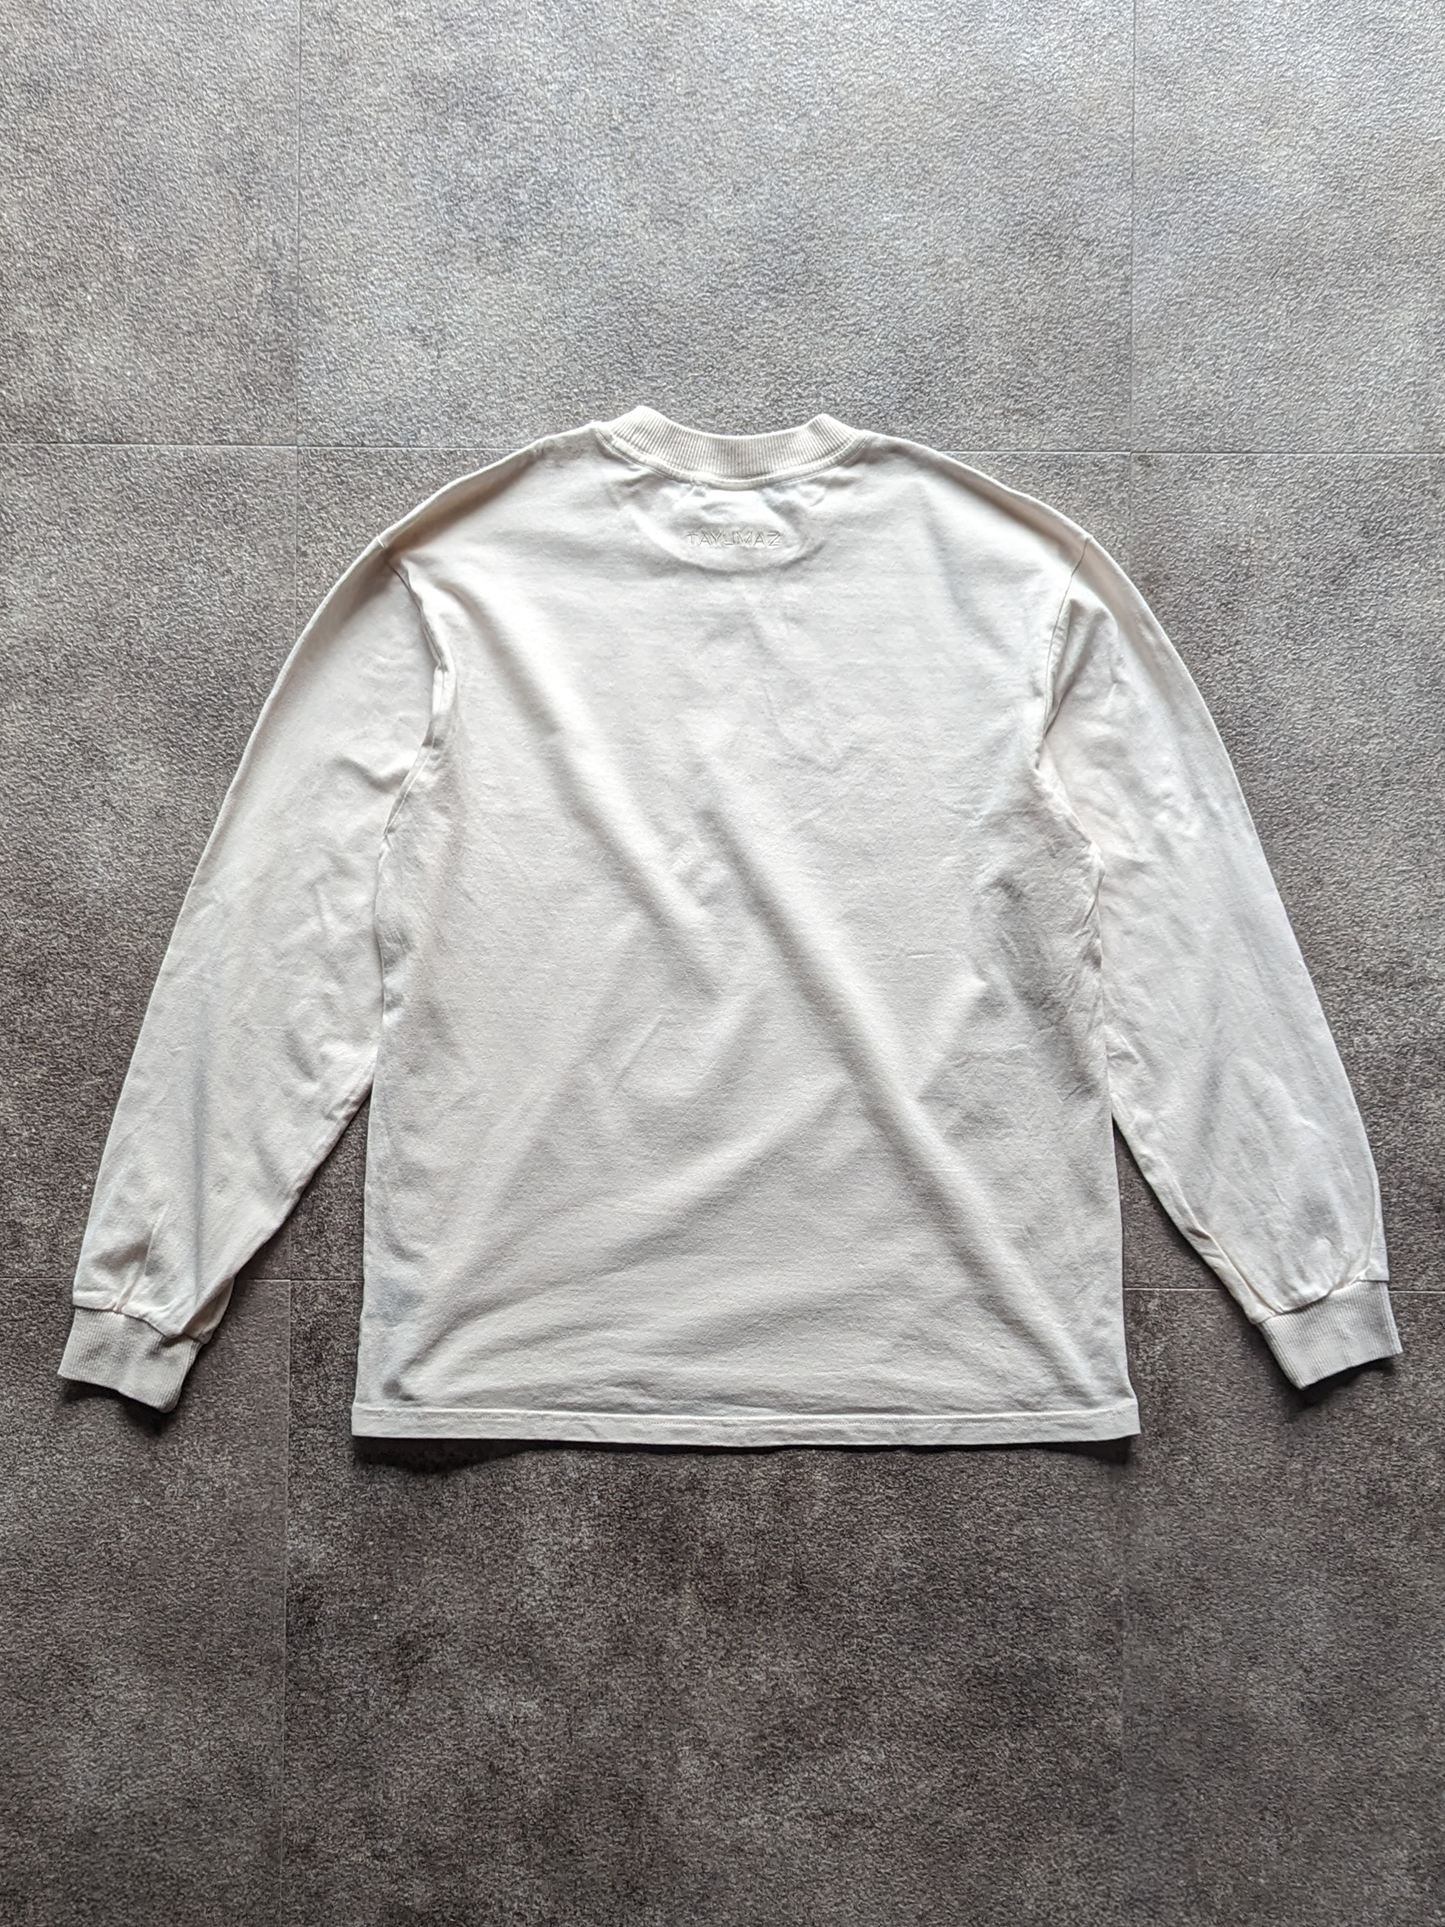 Washed cotton long T-shirt in ivory white